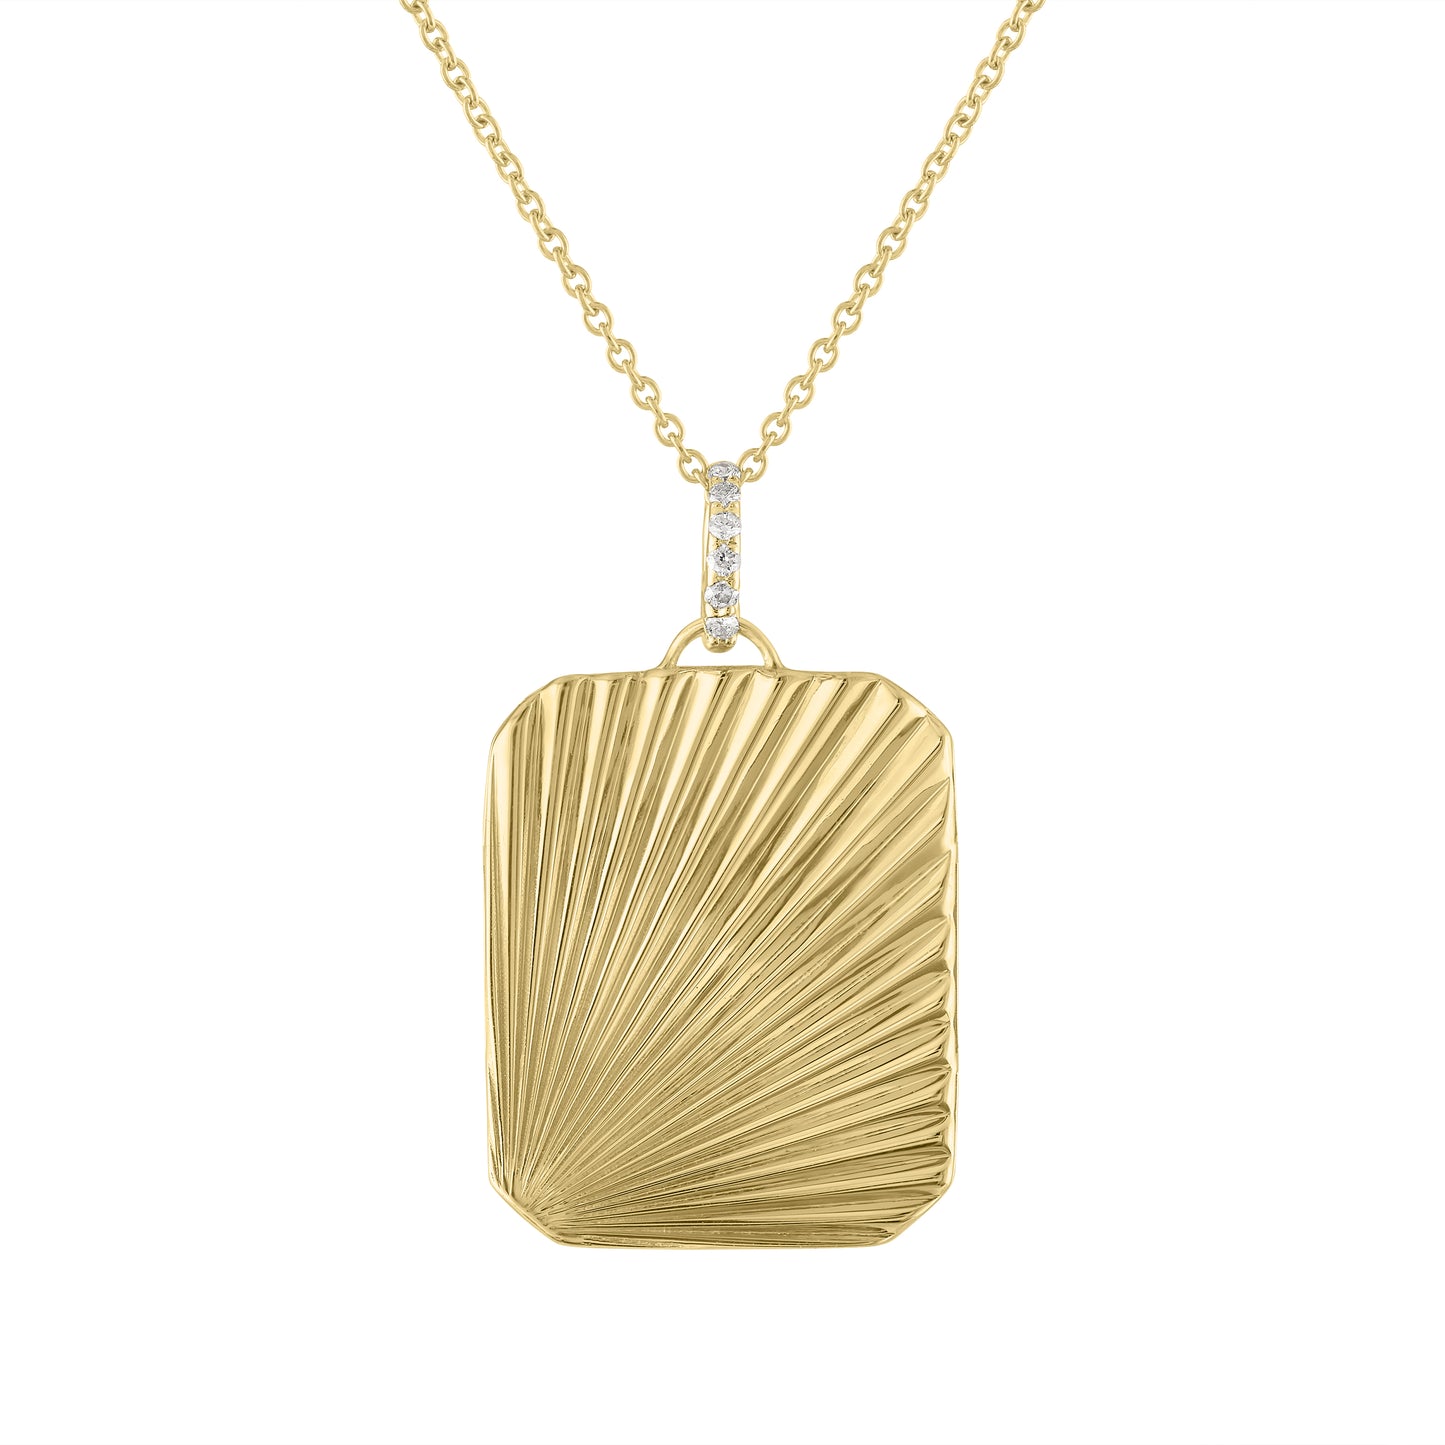 Yellow gold full fluted box necklace with a diamond bail.